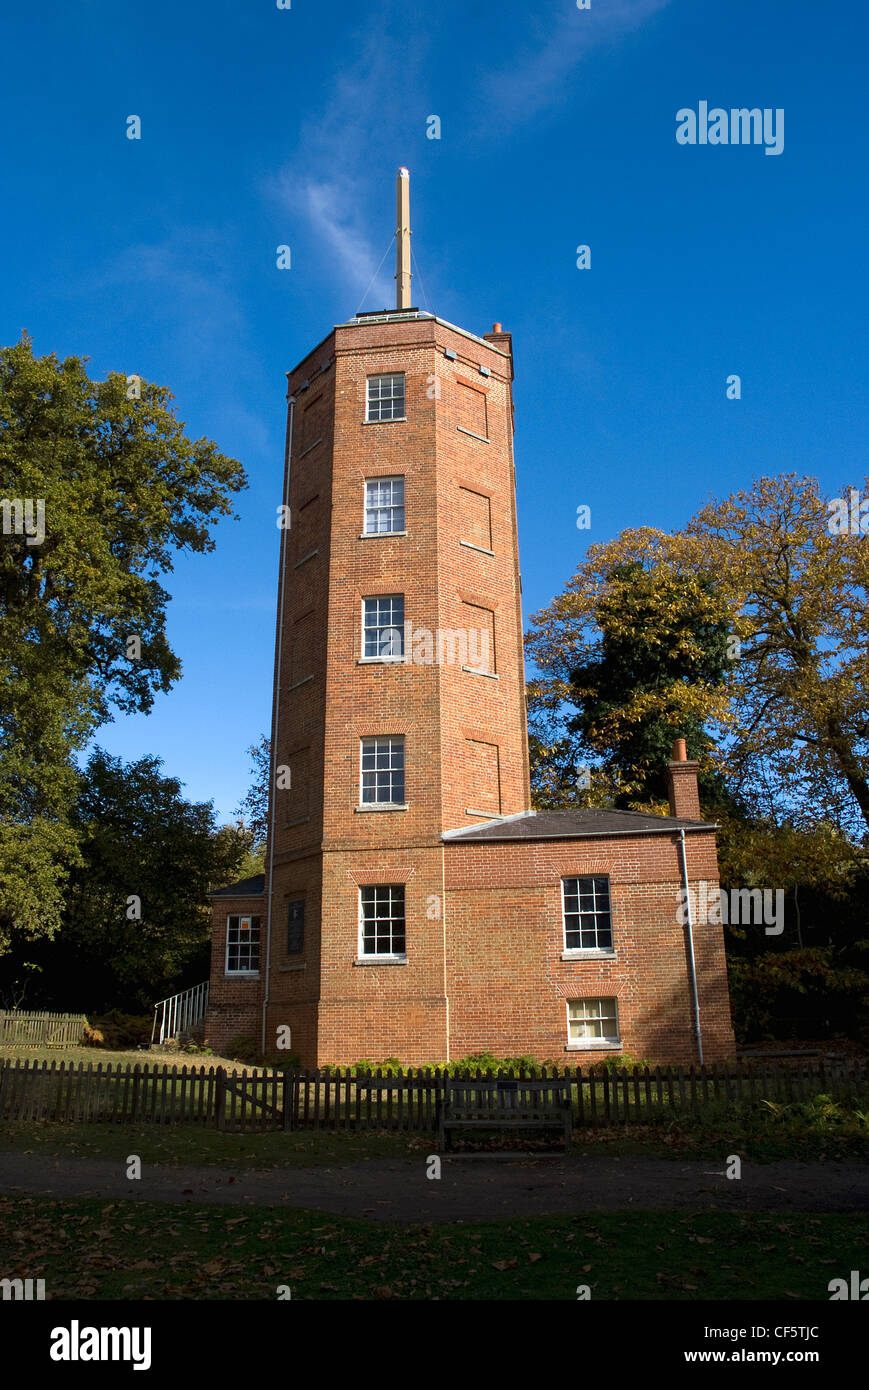 Semaphore Tower at the top of Chatley Heath near Cobham. The tower was originally built as a replacement for the Netley Heath st Stock Photo